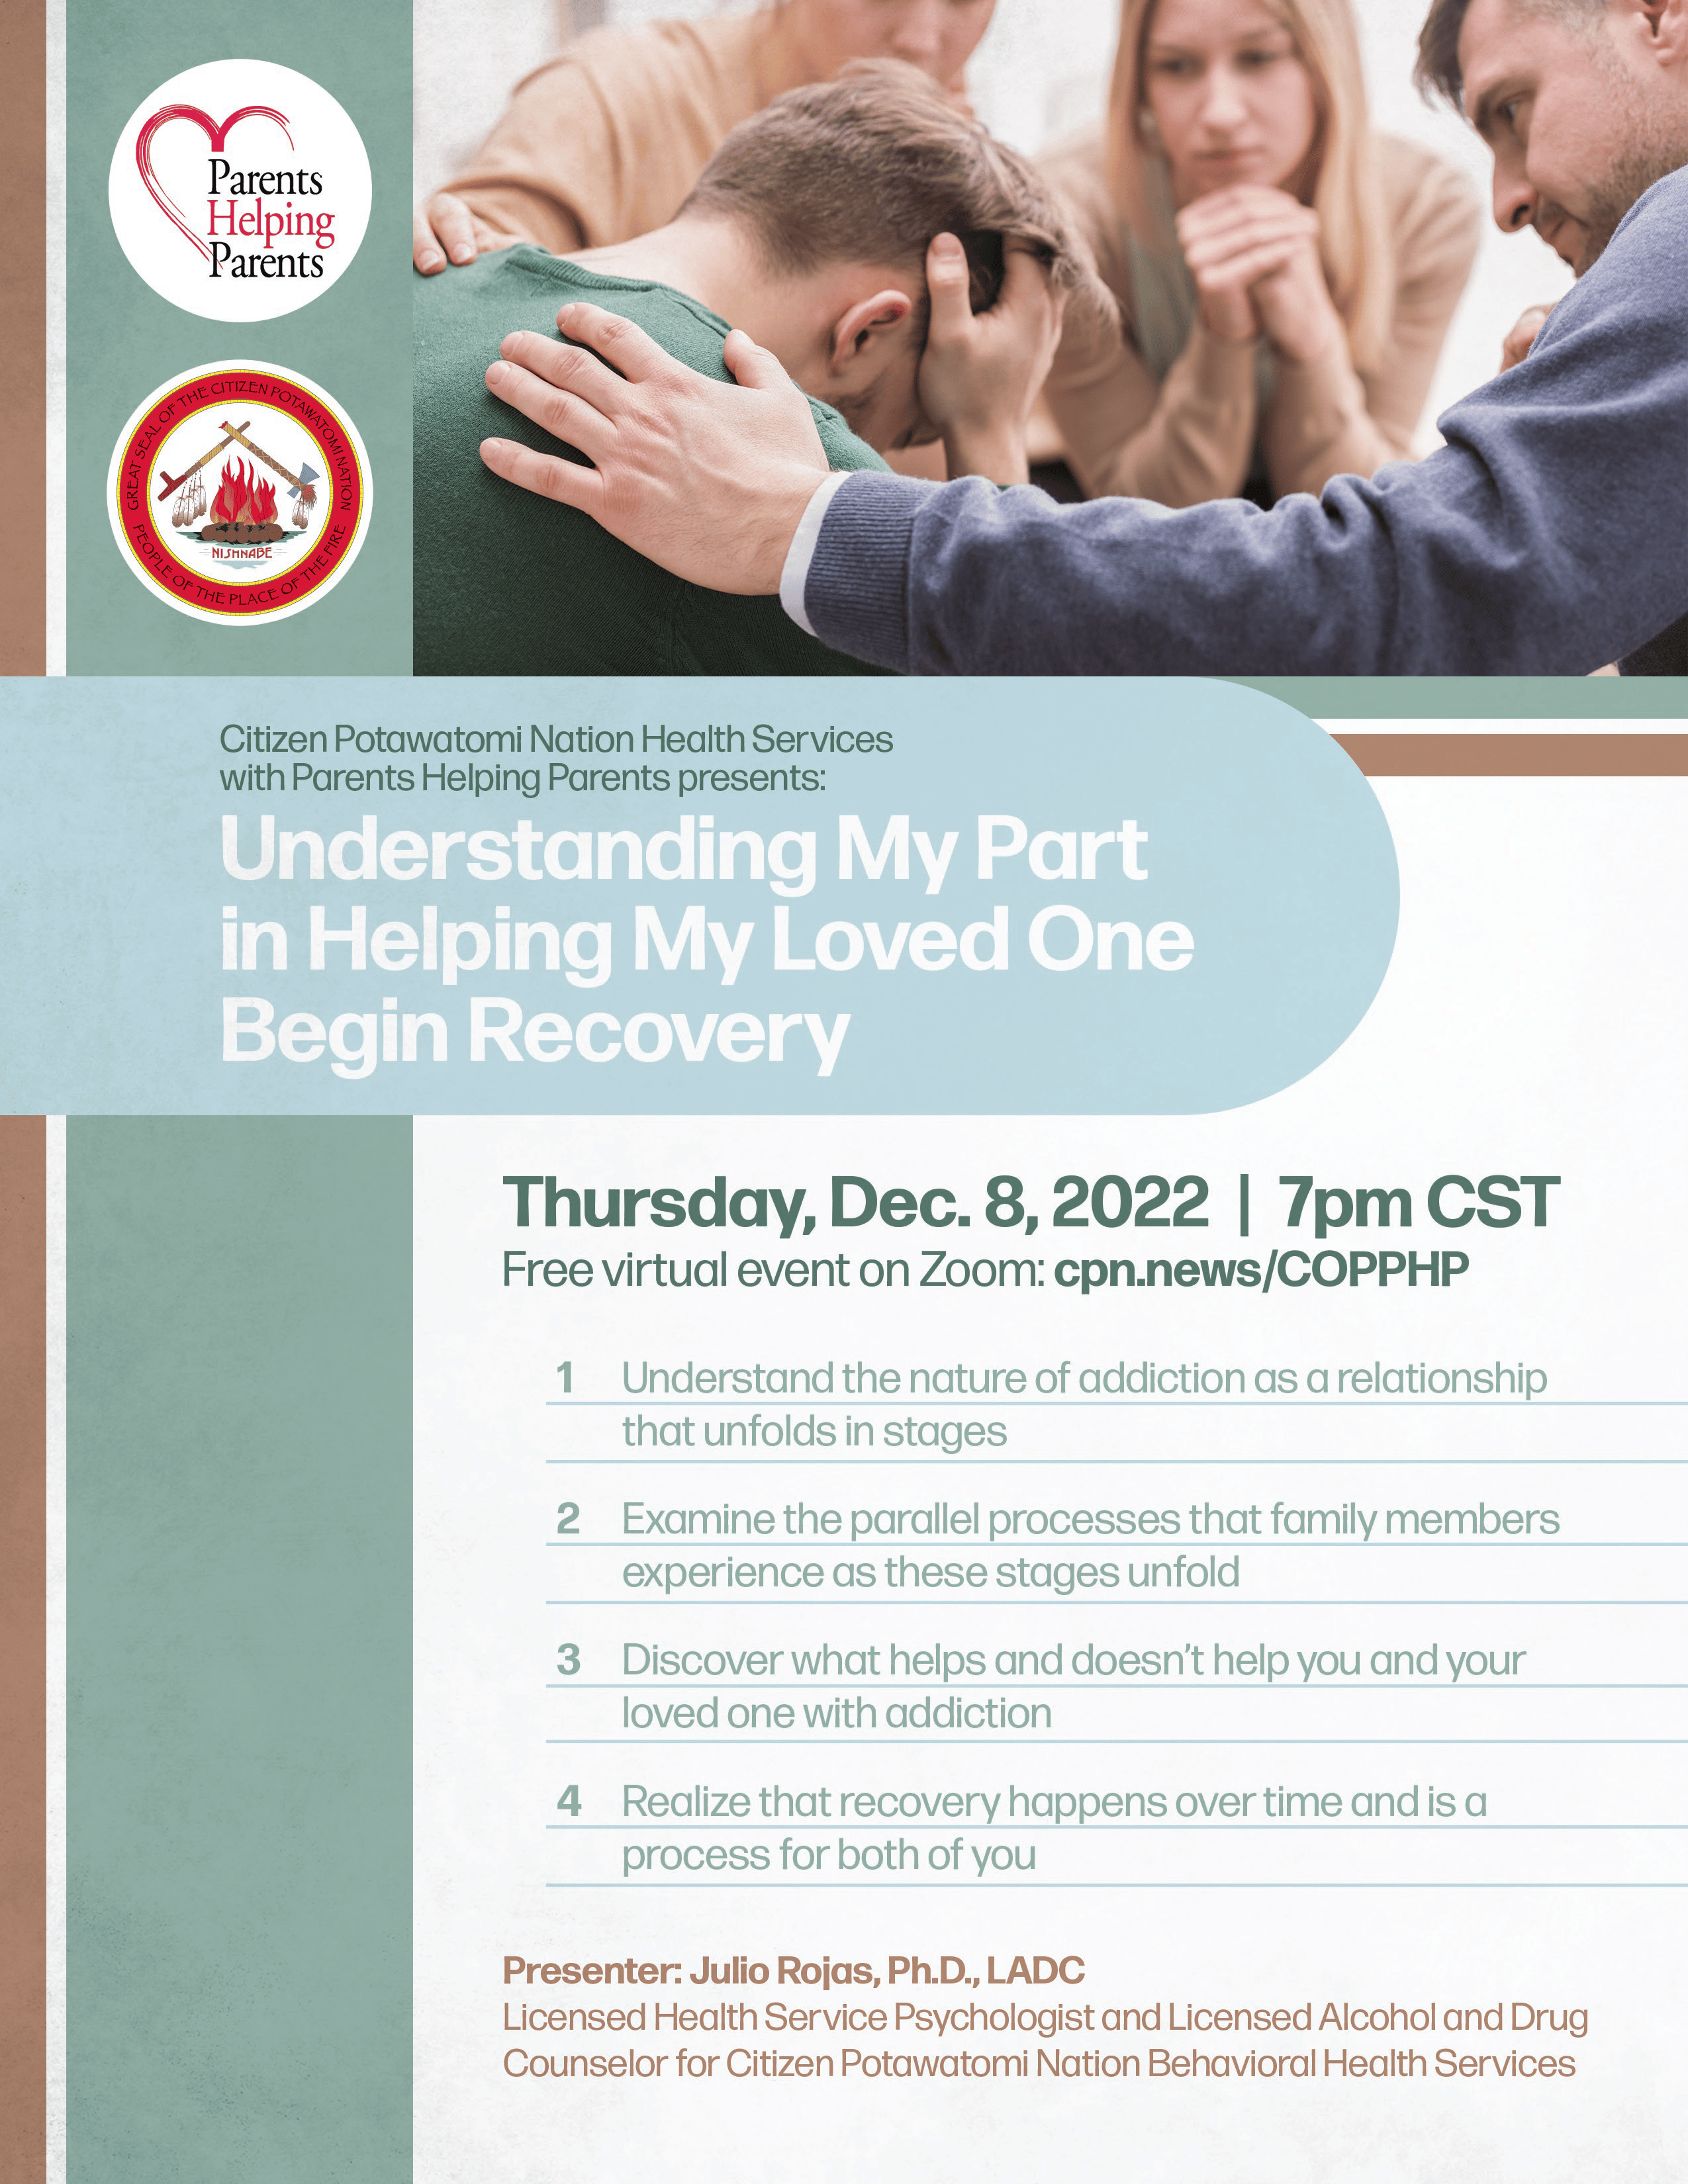 Sea foam green and camel colored flyer advertising the December 8, 2022, virtual event on "Understanding my part in helping my loved one begin recovery," a discussion on family members of addicts hosted by Citizen Potawatomi Nation and Parents Helping Parents.